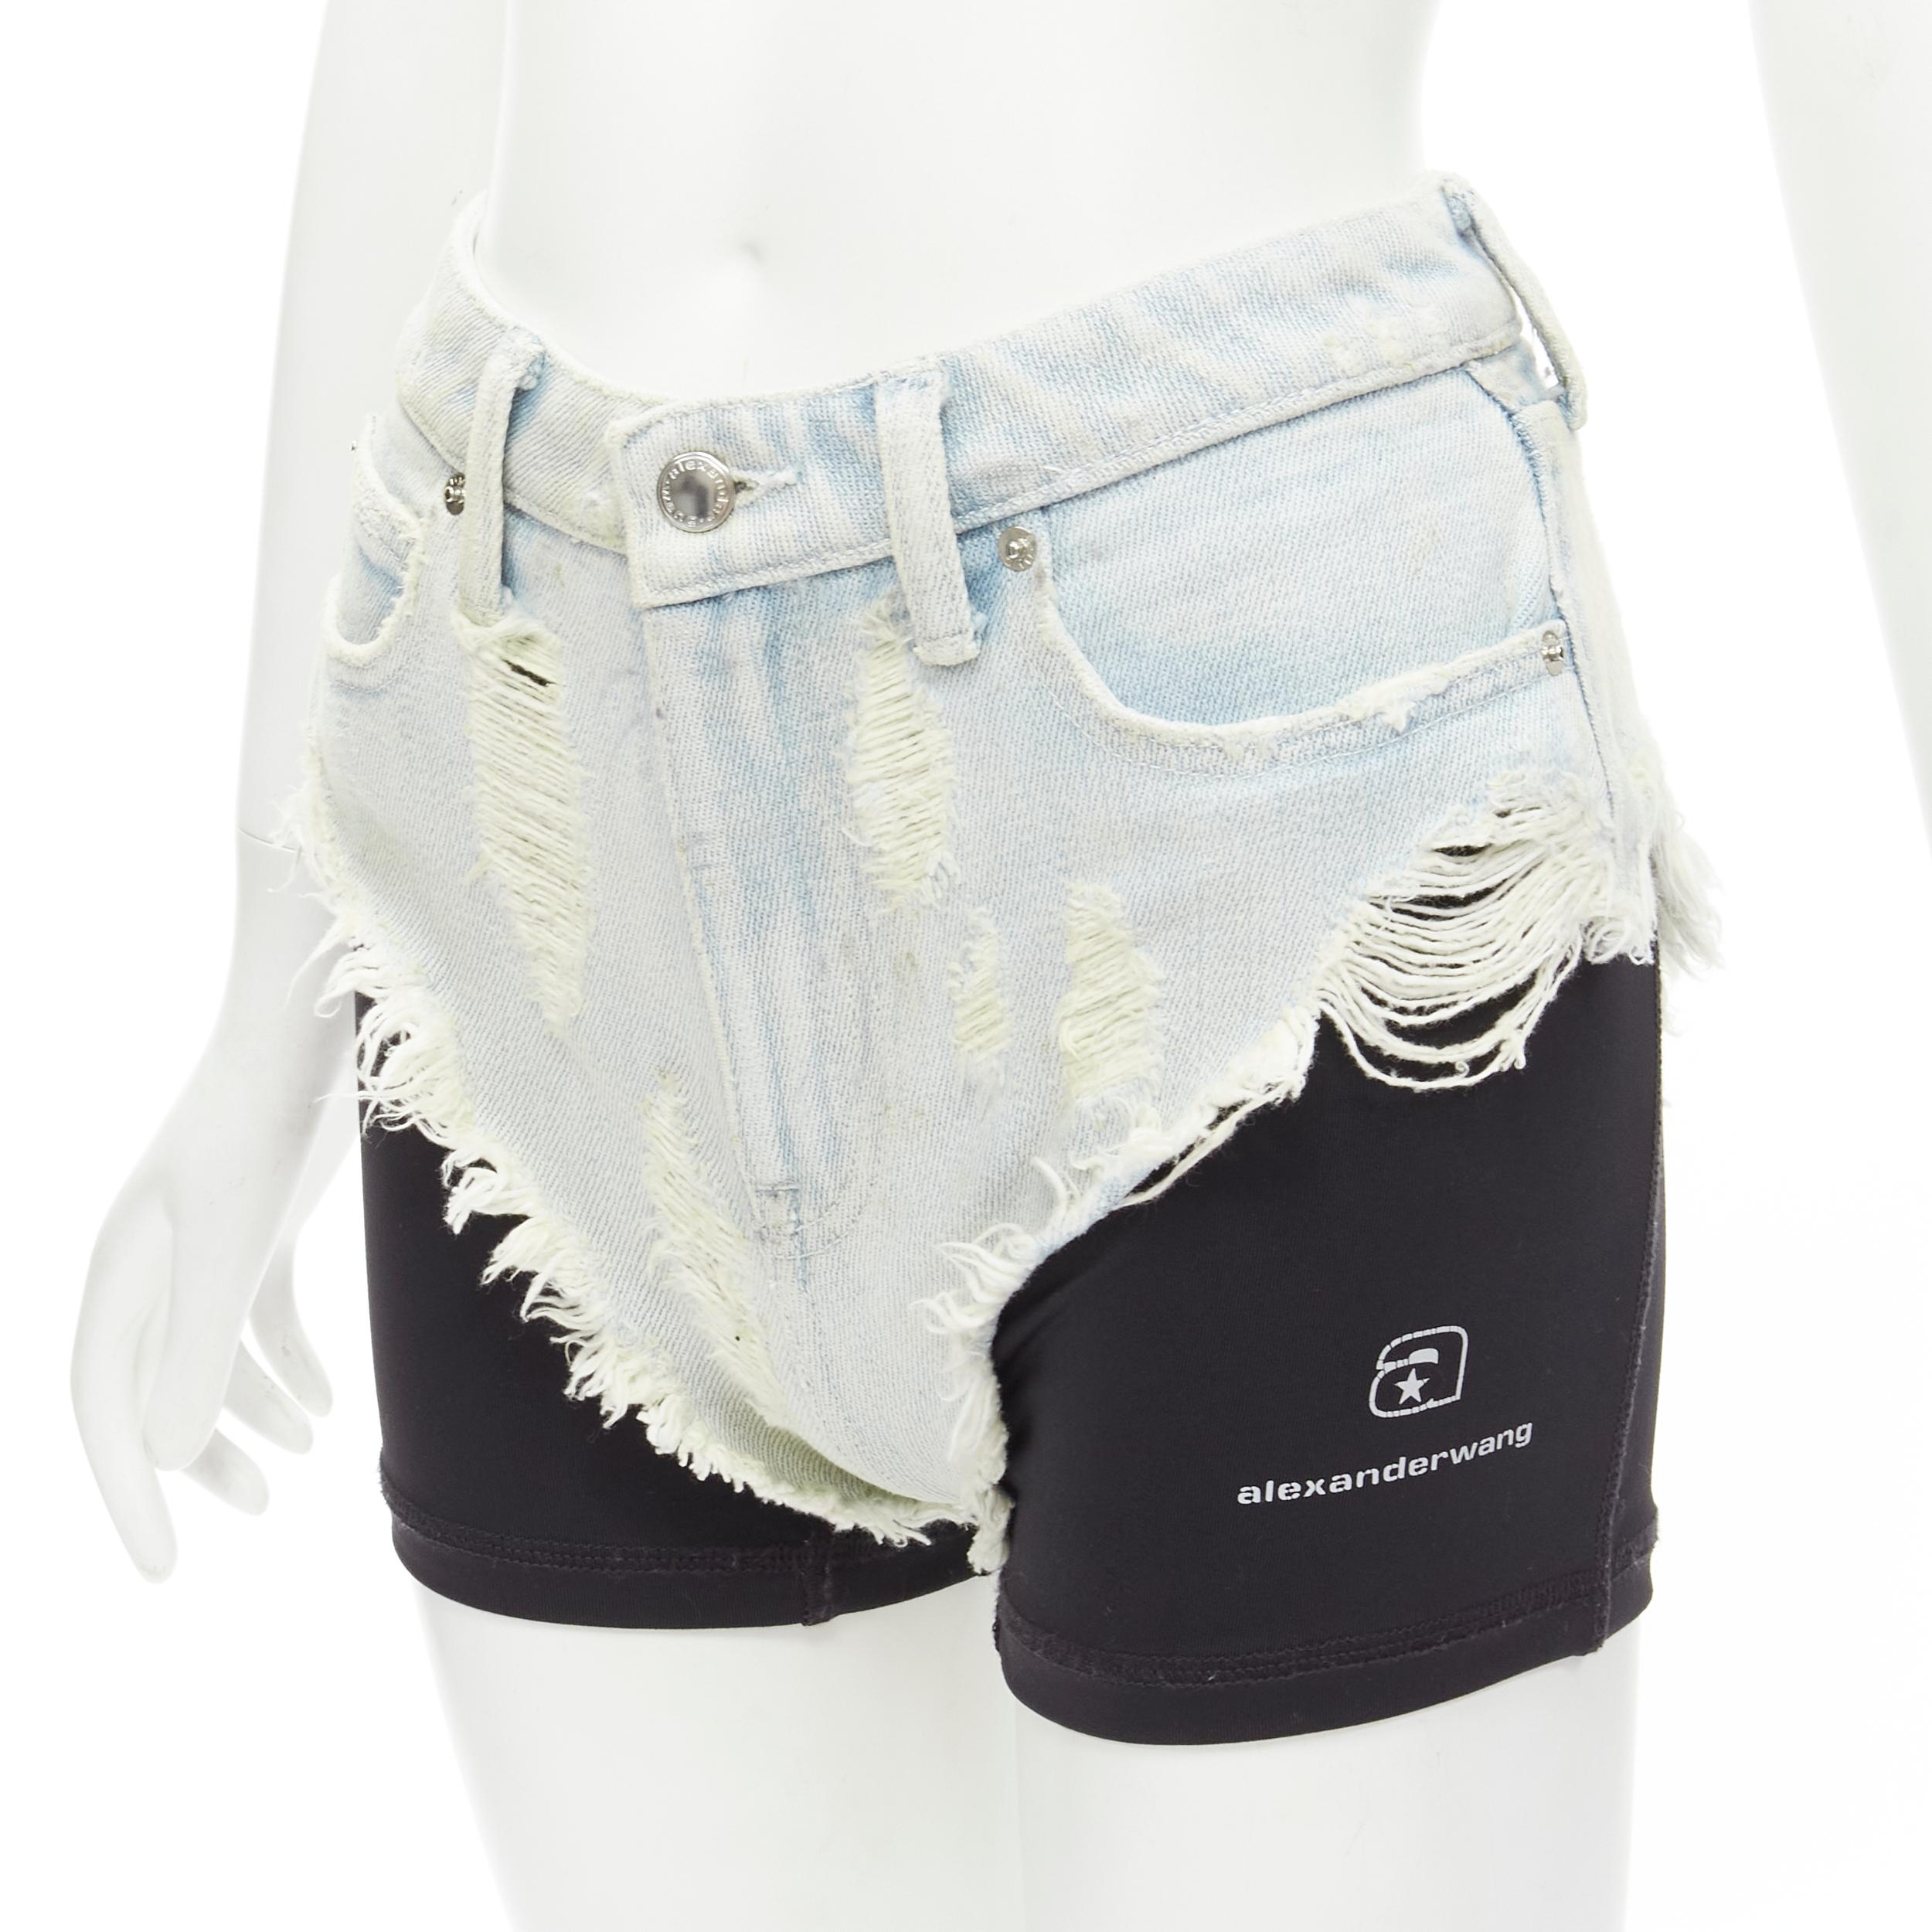 ALEXANDER WANG light distressed denim black boy shorts legging layered shorts XS 
Reference: ANWU/A00534 
Brand: Alexander Wang 
Material: Denim 
Color: Blue 
Pattern: Solid 
Closure: Zip 
Extra Detail: Zip fly closure. 3-pocket at front. High rise